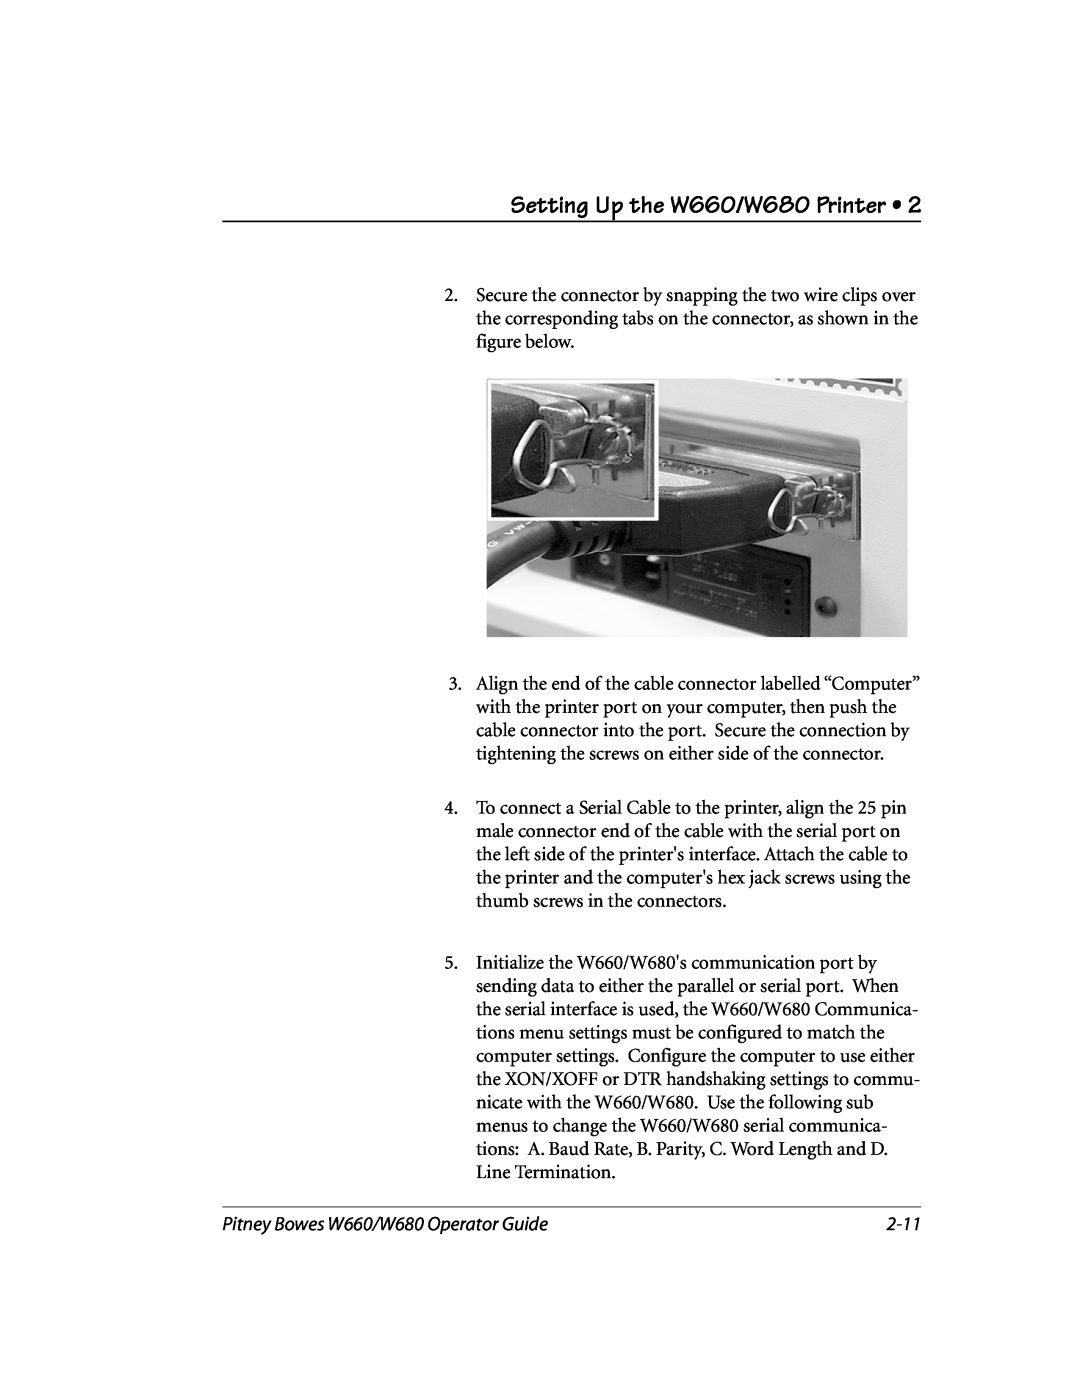 Pitney Bowes manual 2-11, Setting Up the W660/W680 Printer, Pitney Bowes W660/W680 Operator Guide 